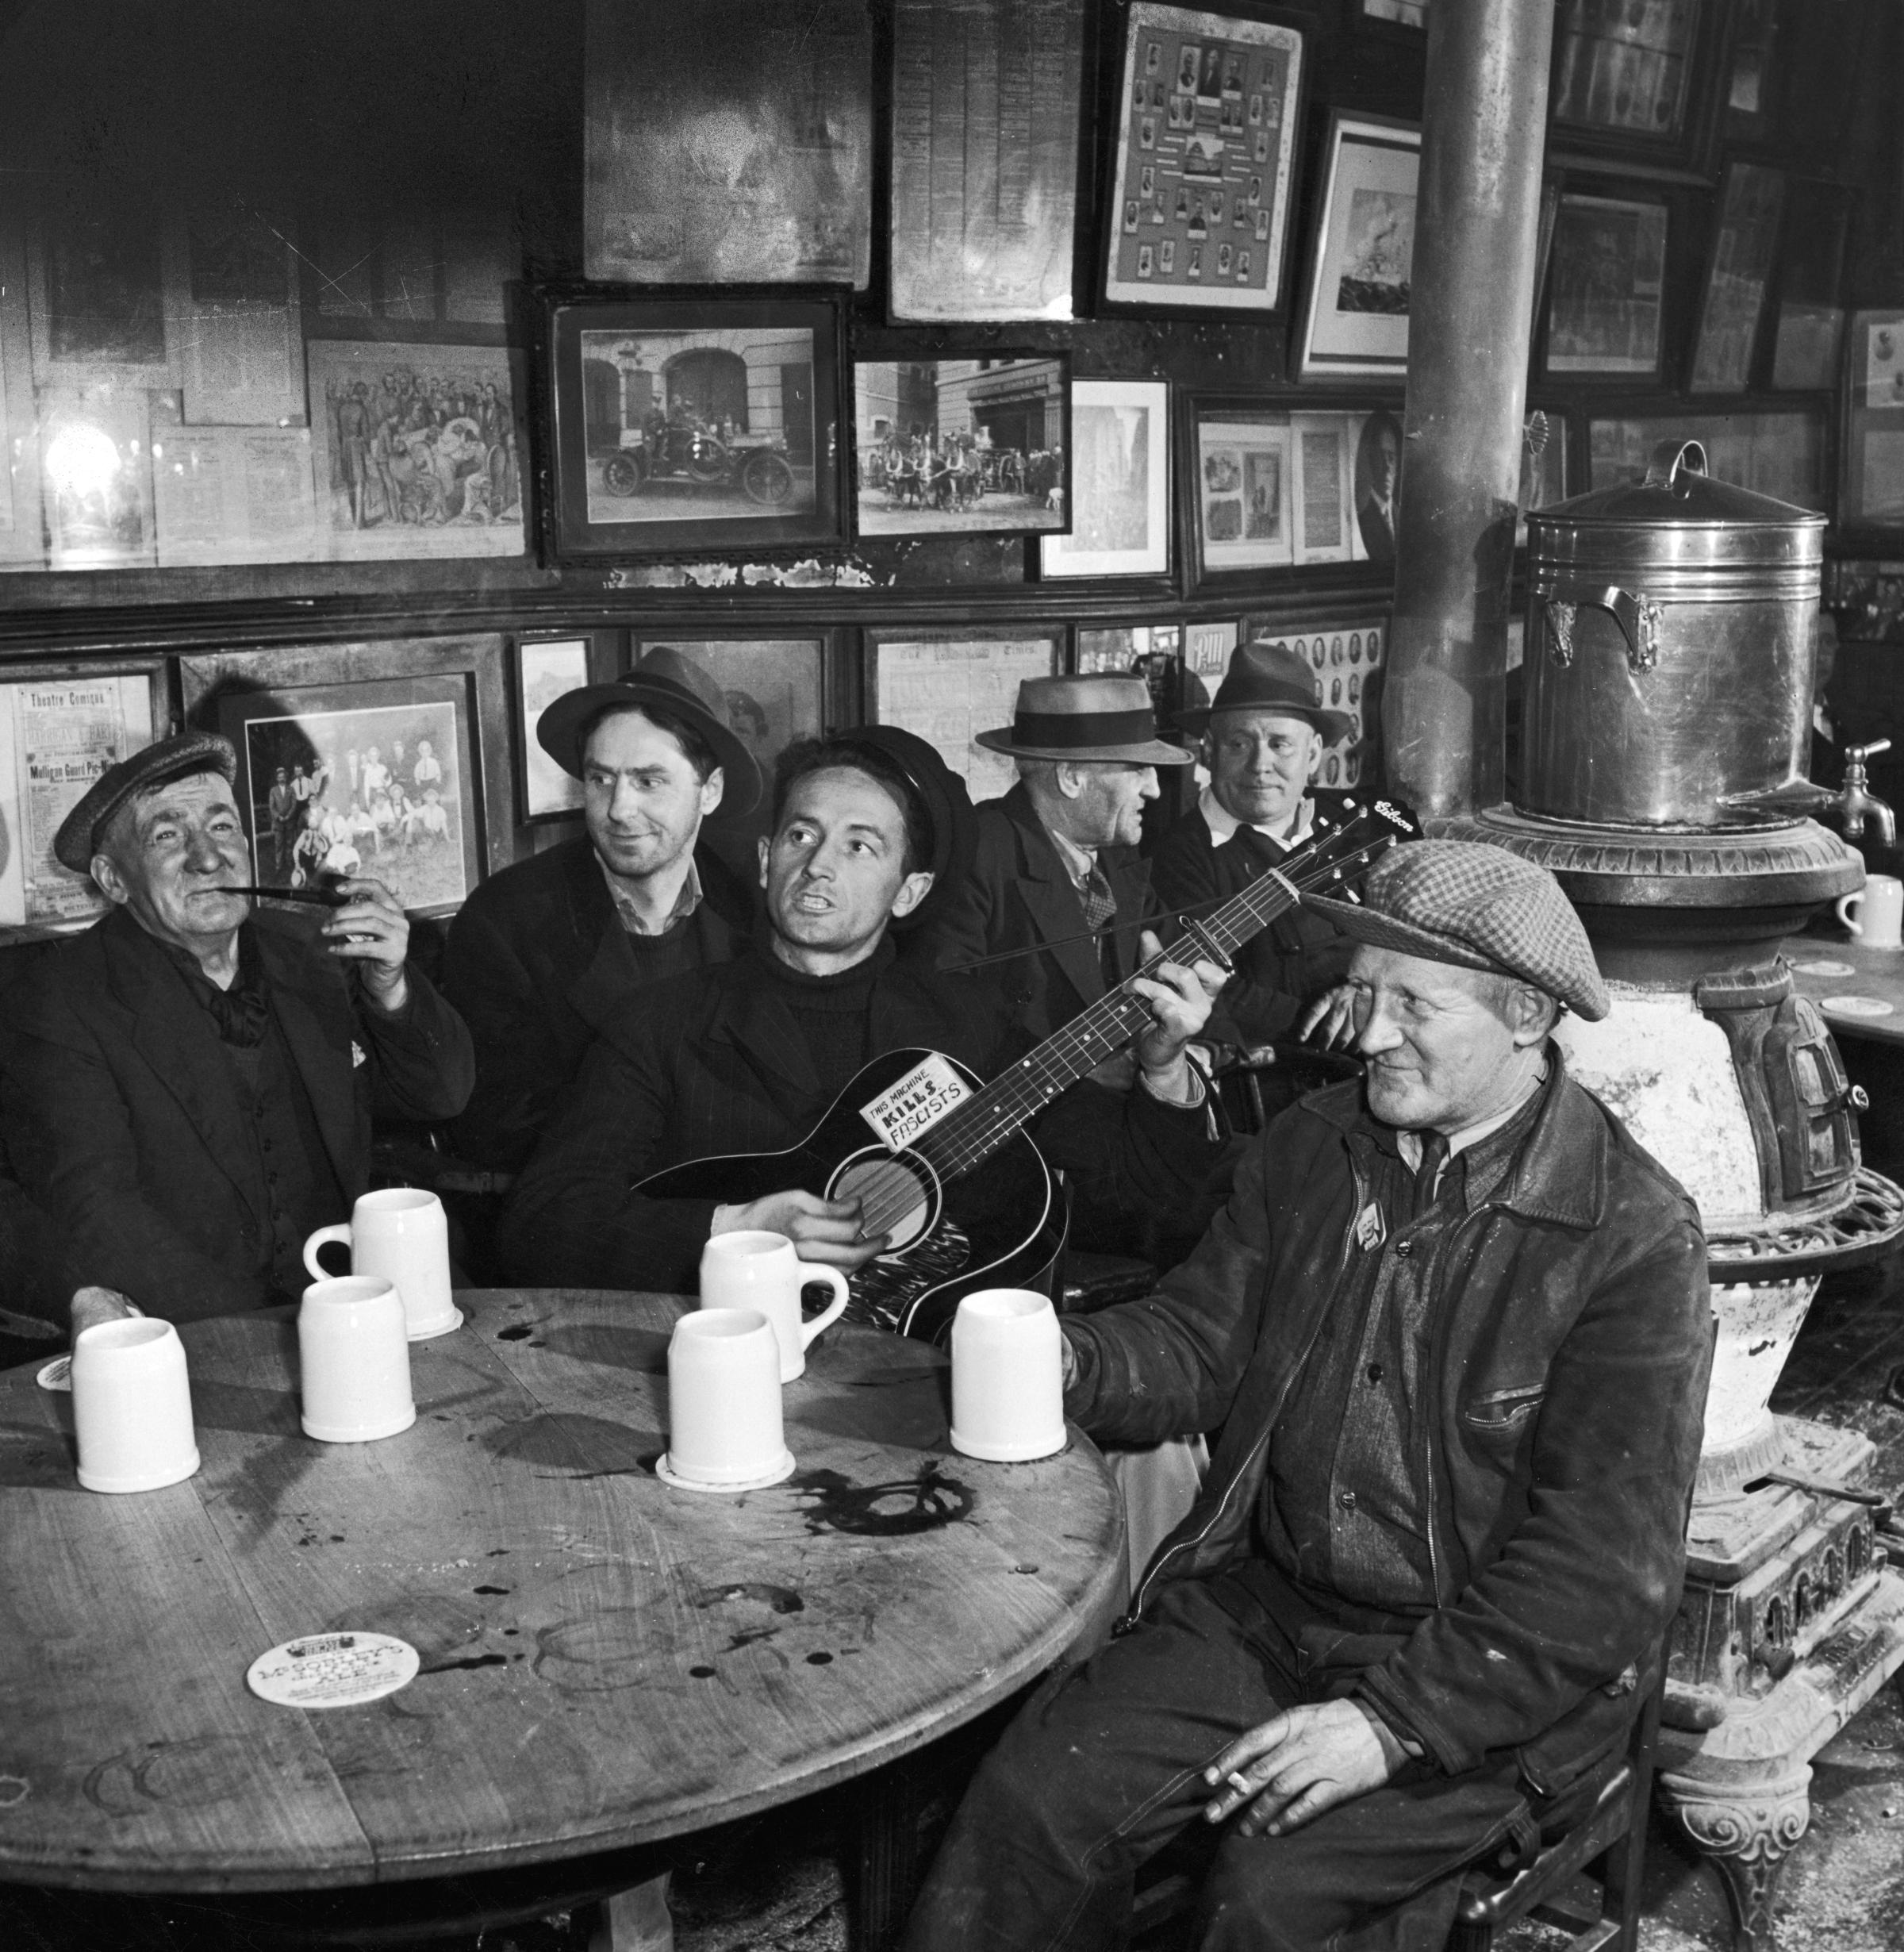 Woody Guthrie at McSorley's Old Ale House, still standing today in the East Village, New York City, 1943.